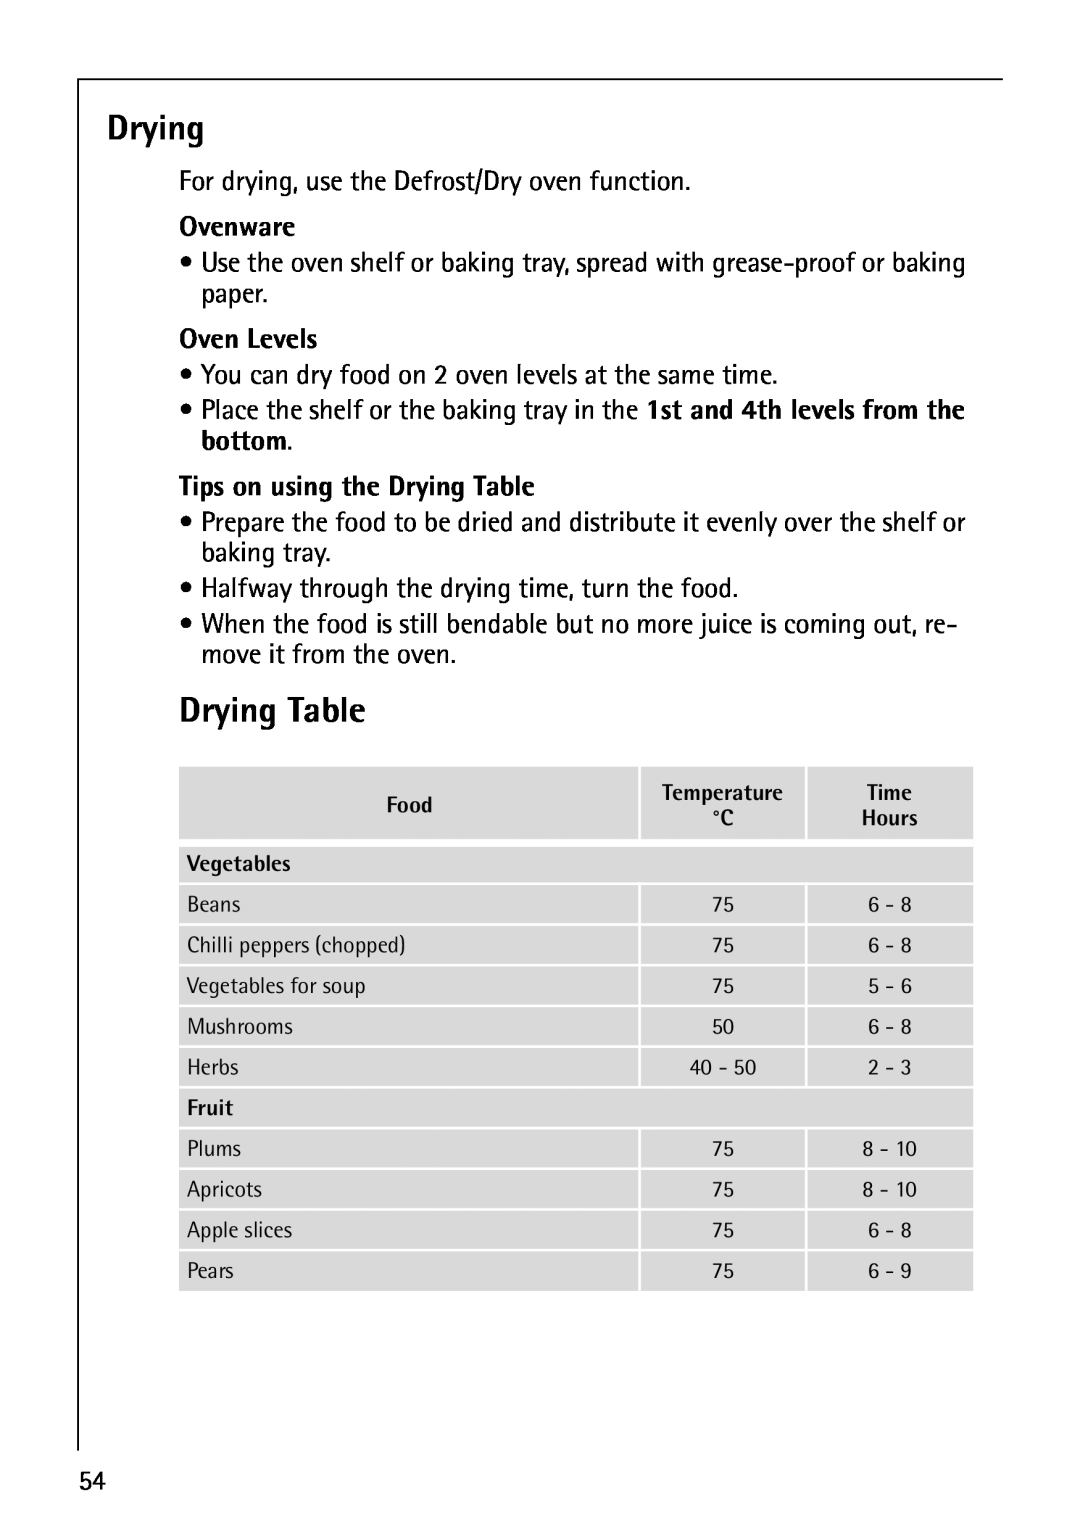 AEG B8920-1 manual Ovenware, Tips on using the Drying Table, Oven Levels 